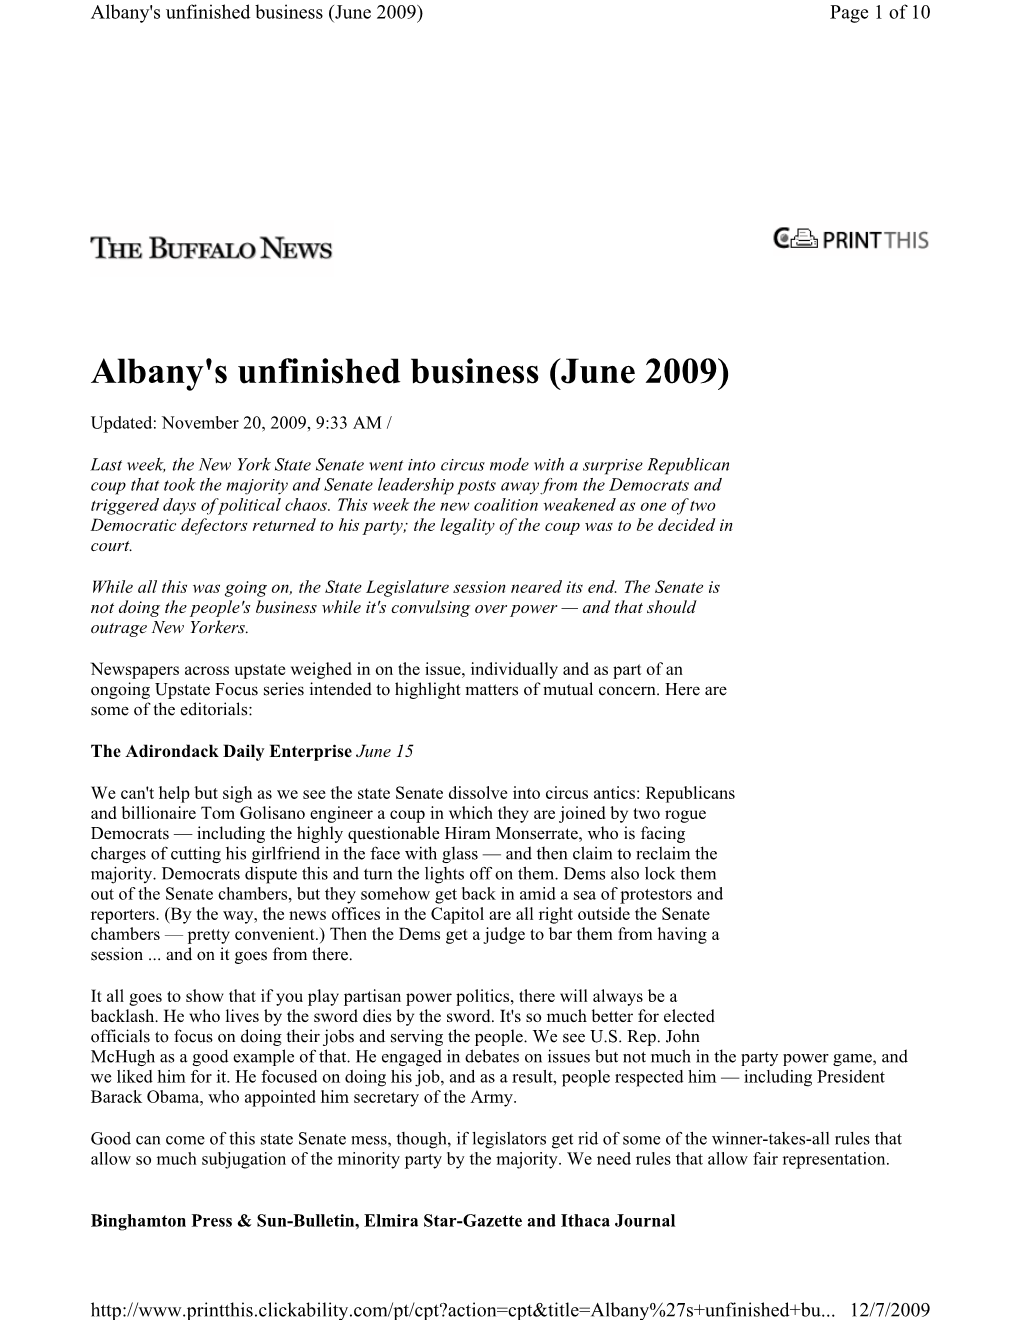 Albany's Unfinished Business (June 2009) Page 1 of 10